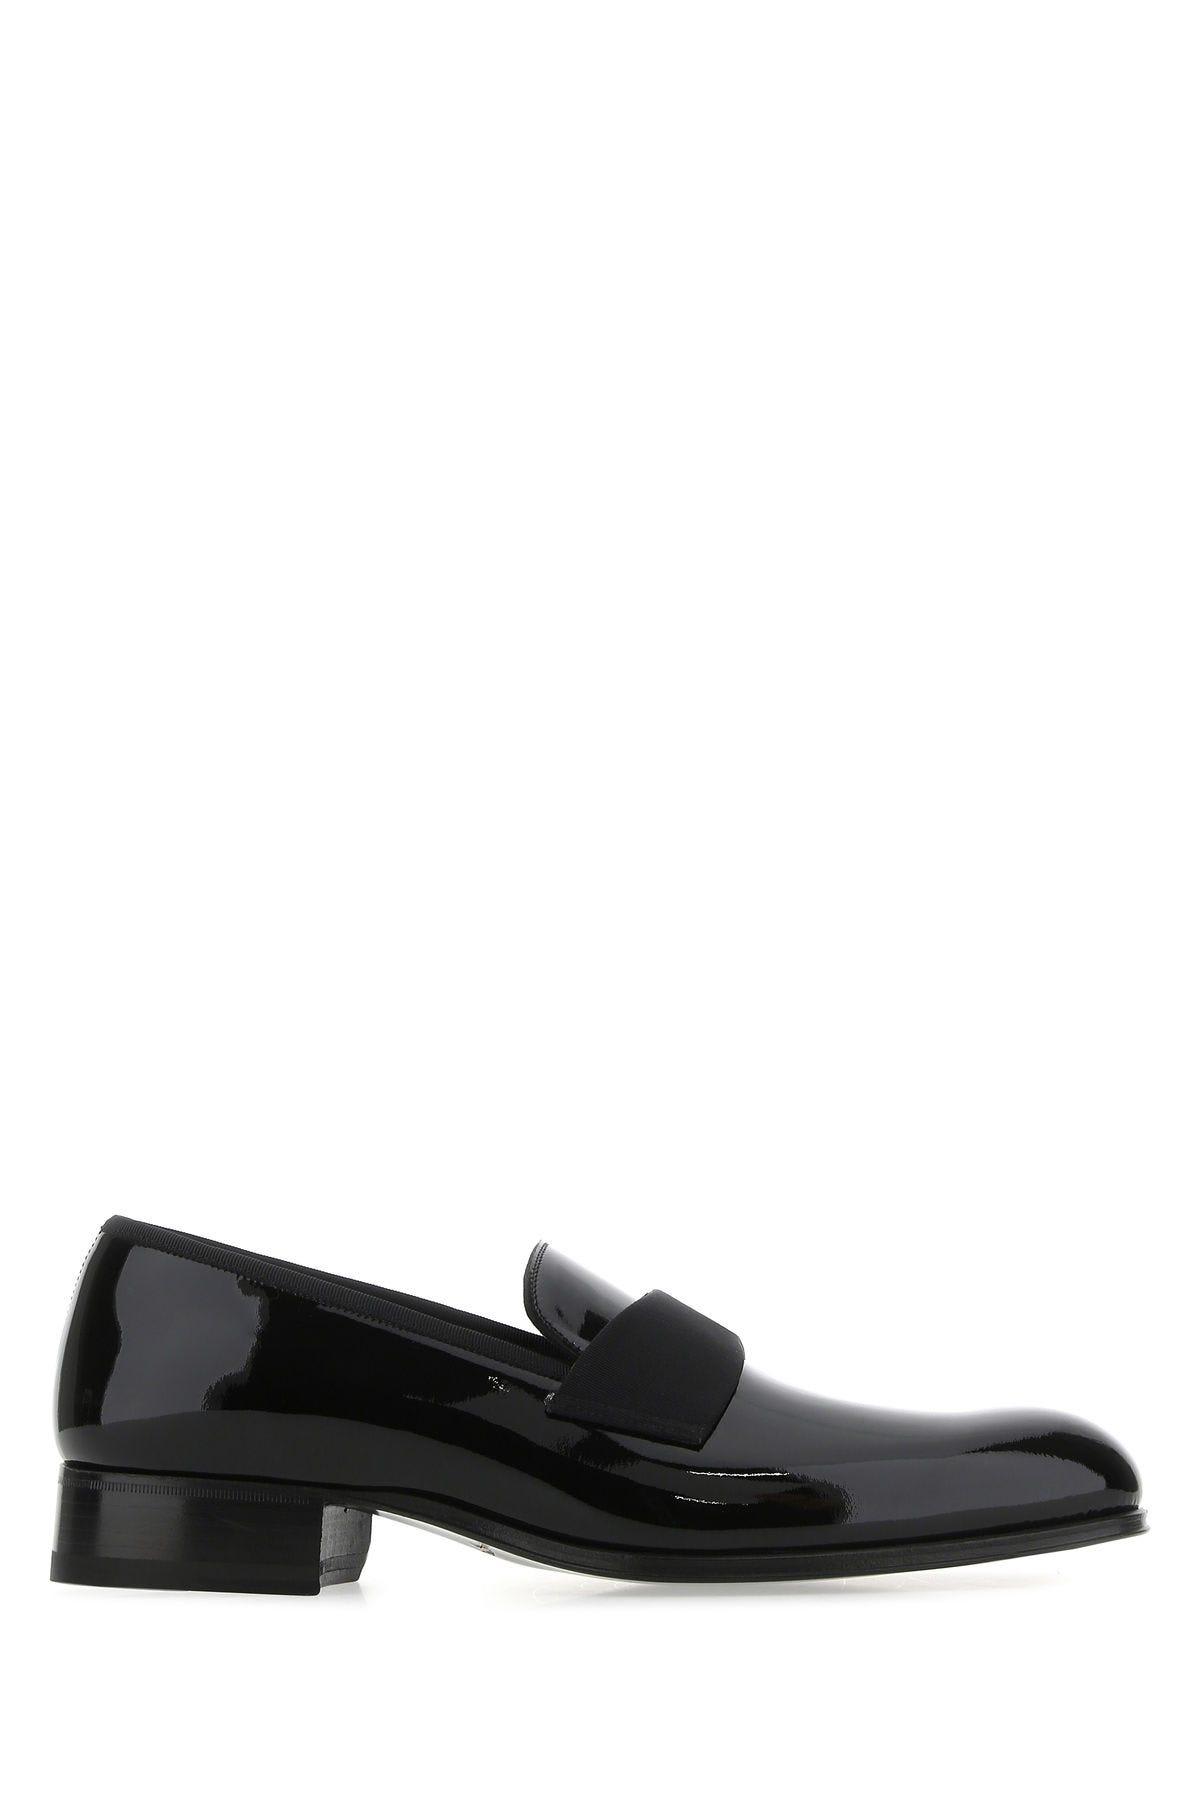 TOM FORD BLACK LEATHER LOAFERS